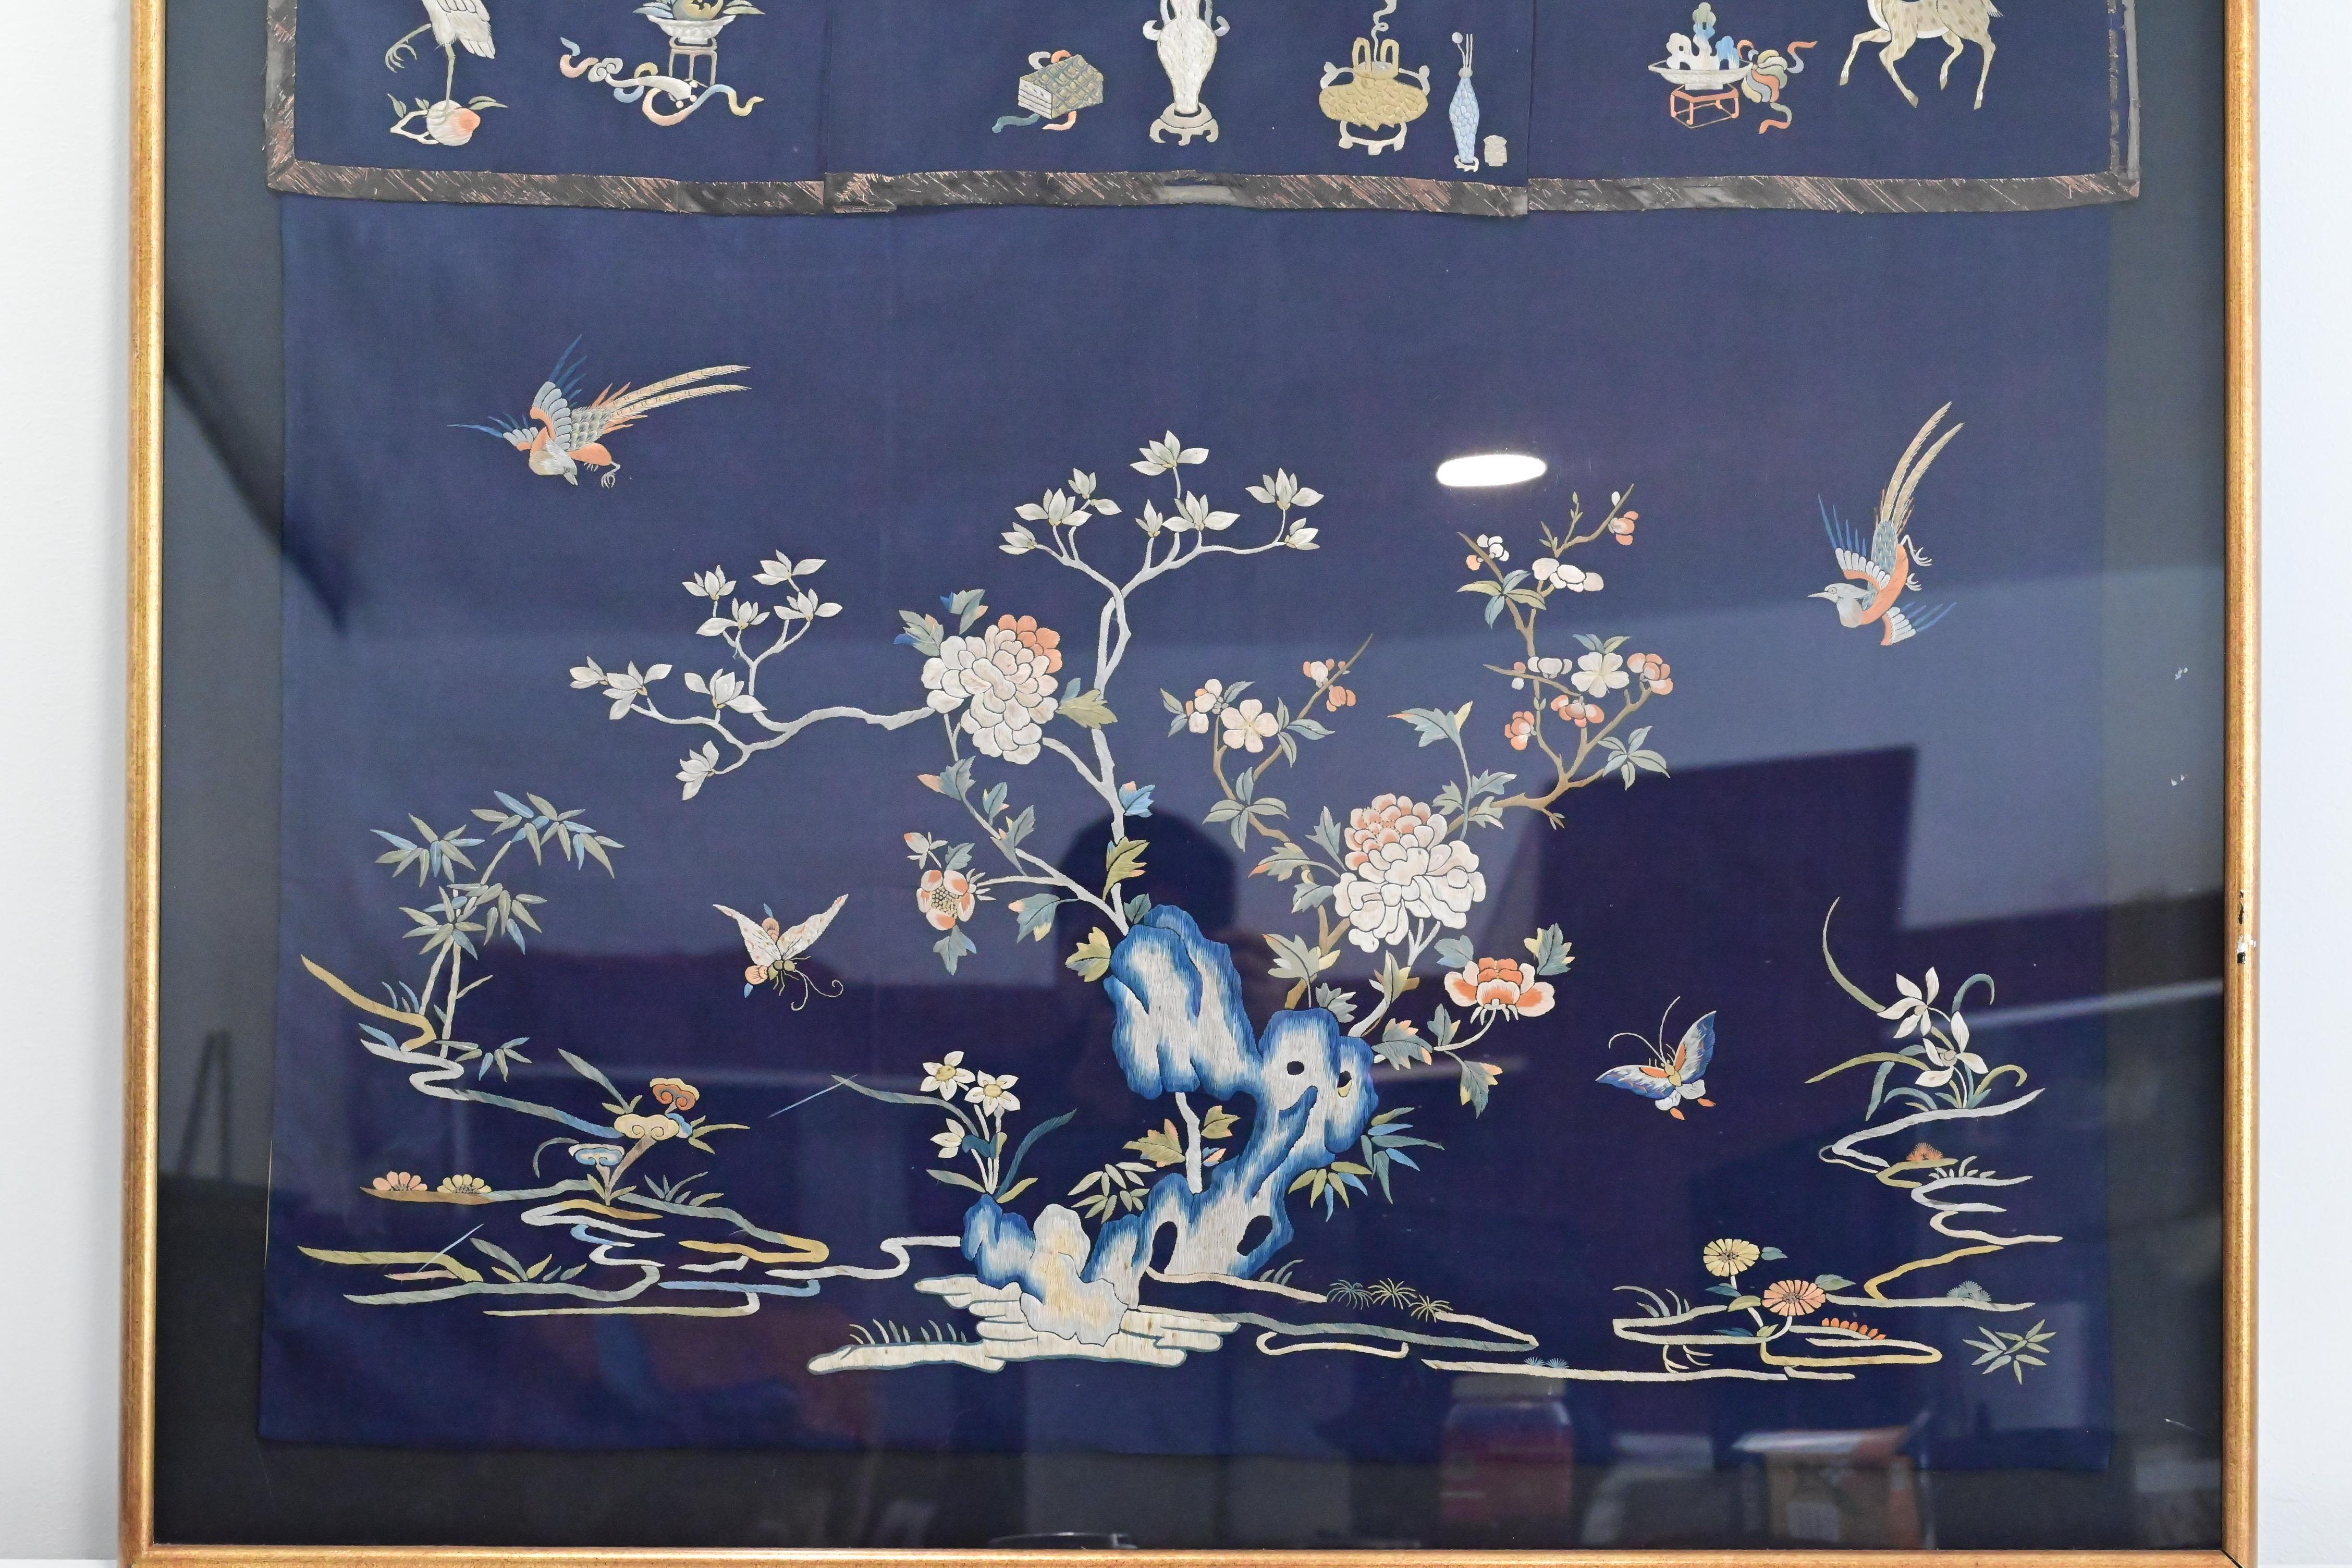 This exquisite Chinese table cover from the Qing period is a true work of art. Made from luxurious silk and fabric, it boasts intricate details that showcase the exceptional craftsmanship of its creators. This piece is an original antique that dates